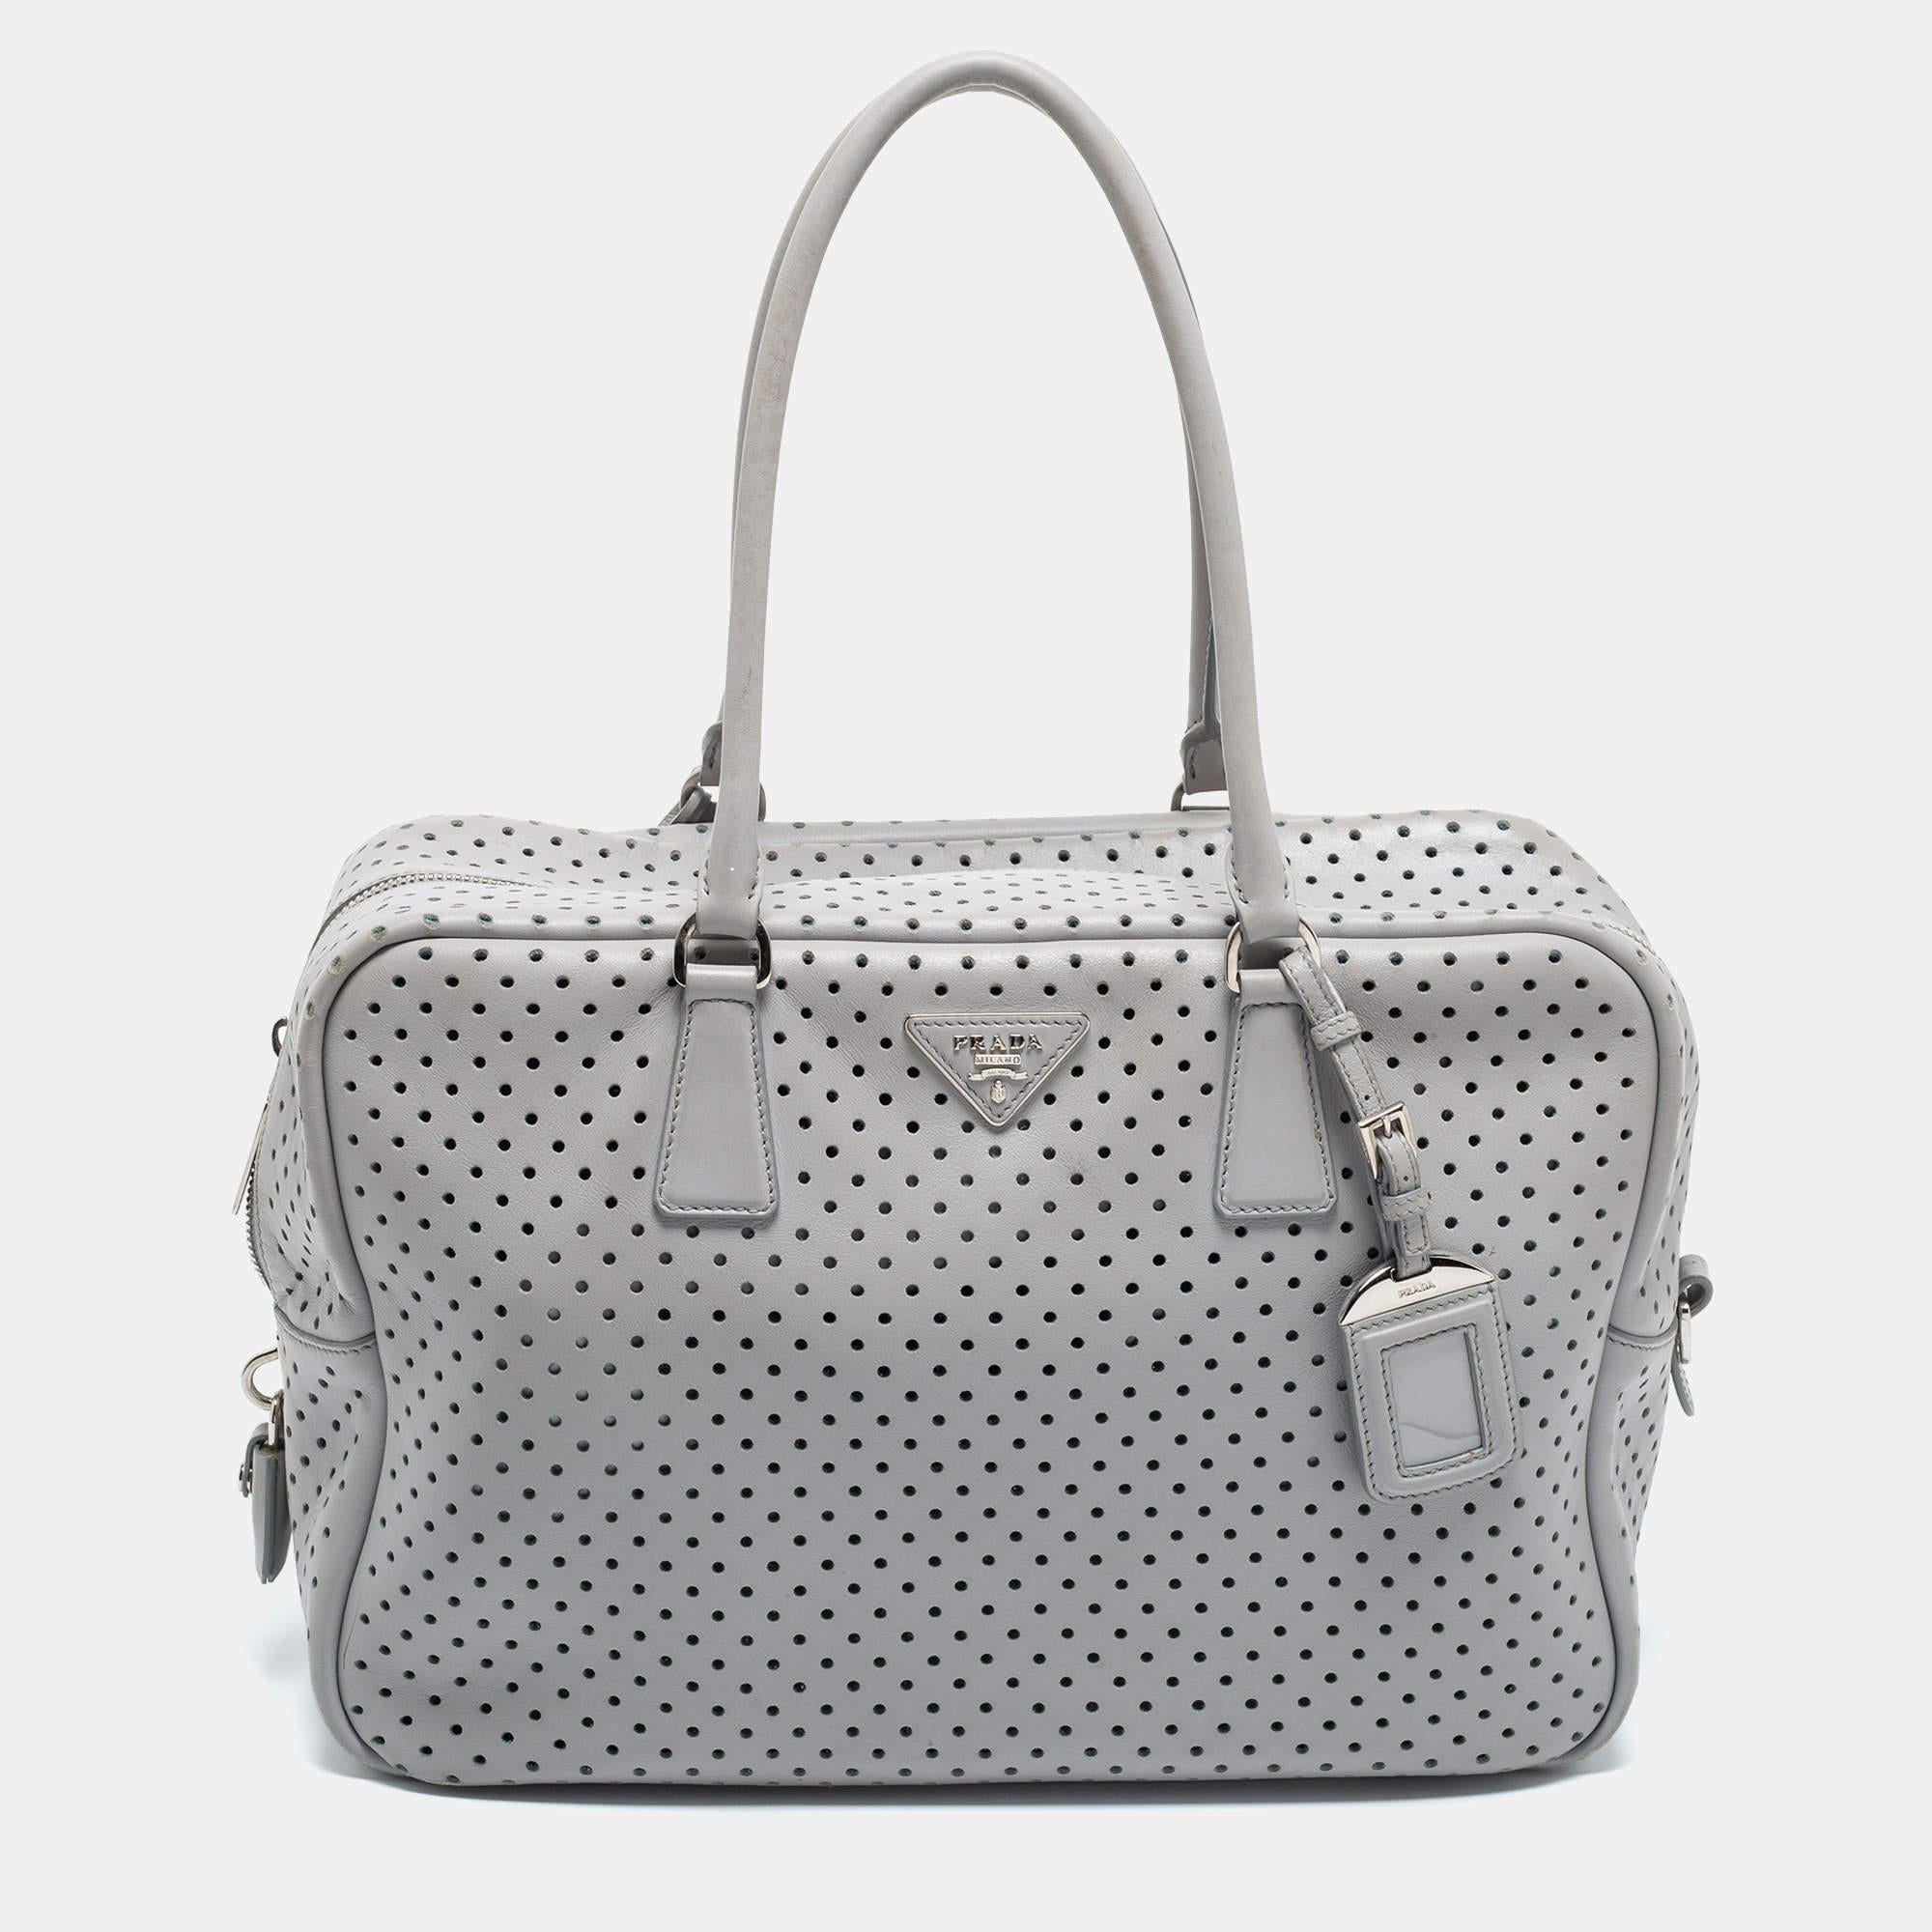 Experience fine craftsmanship with this immaculately designed Prada leather bag. It has two handles, a front logo, and a perforated exterior.

Includes: Original Dustbag, Detachable Pouch, Padlock & Key

